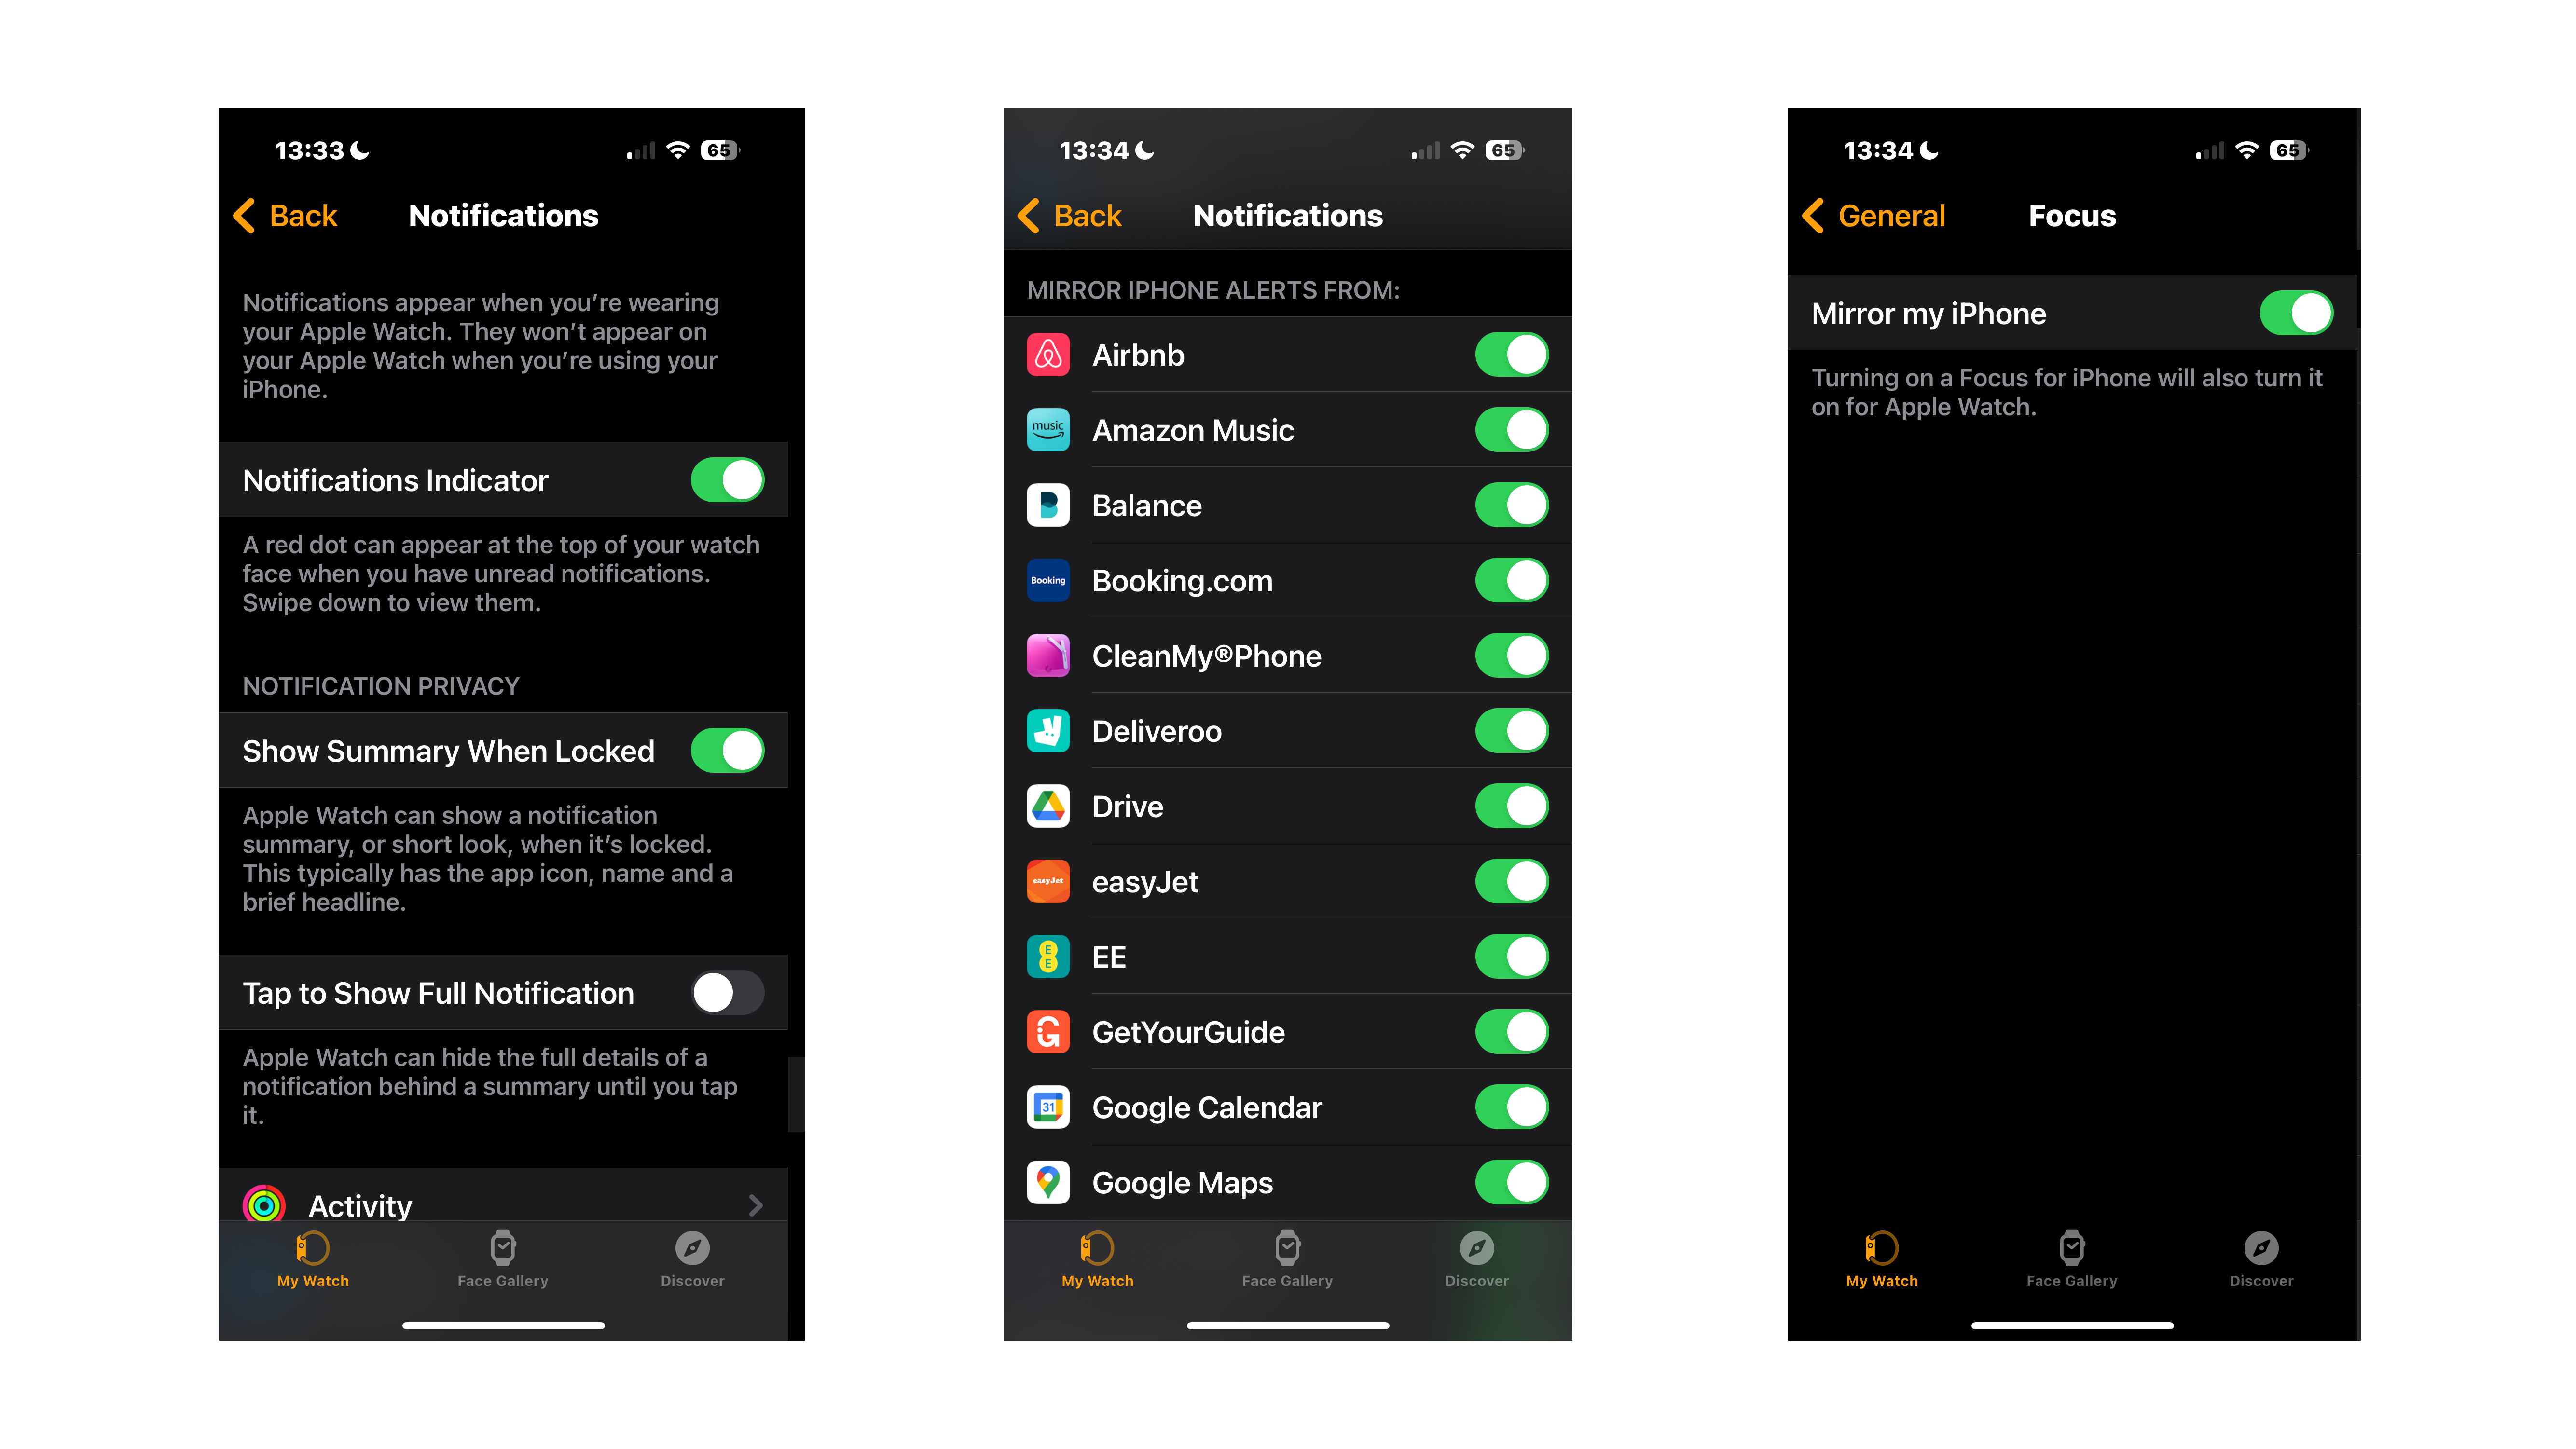 Screenshots of the Apple Watch notification settings on the iPhone.